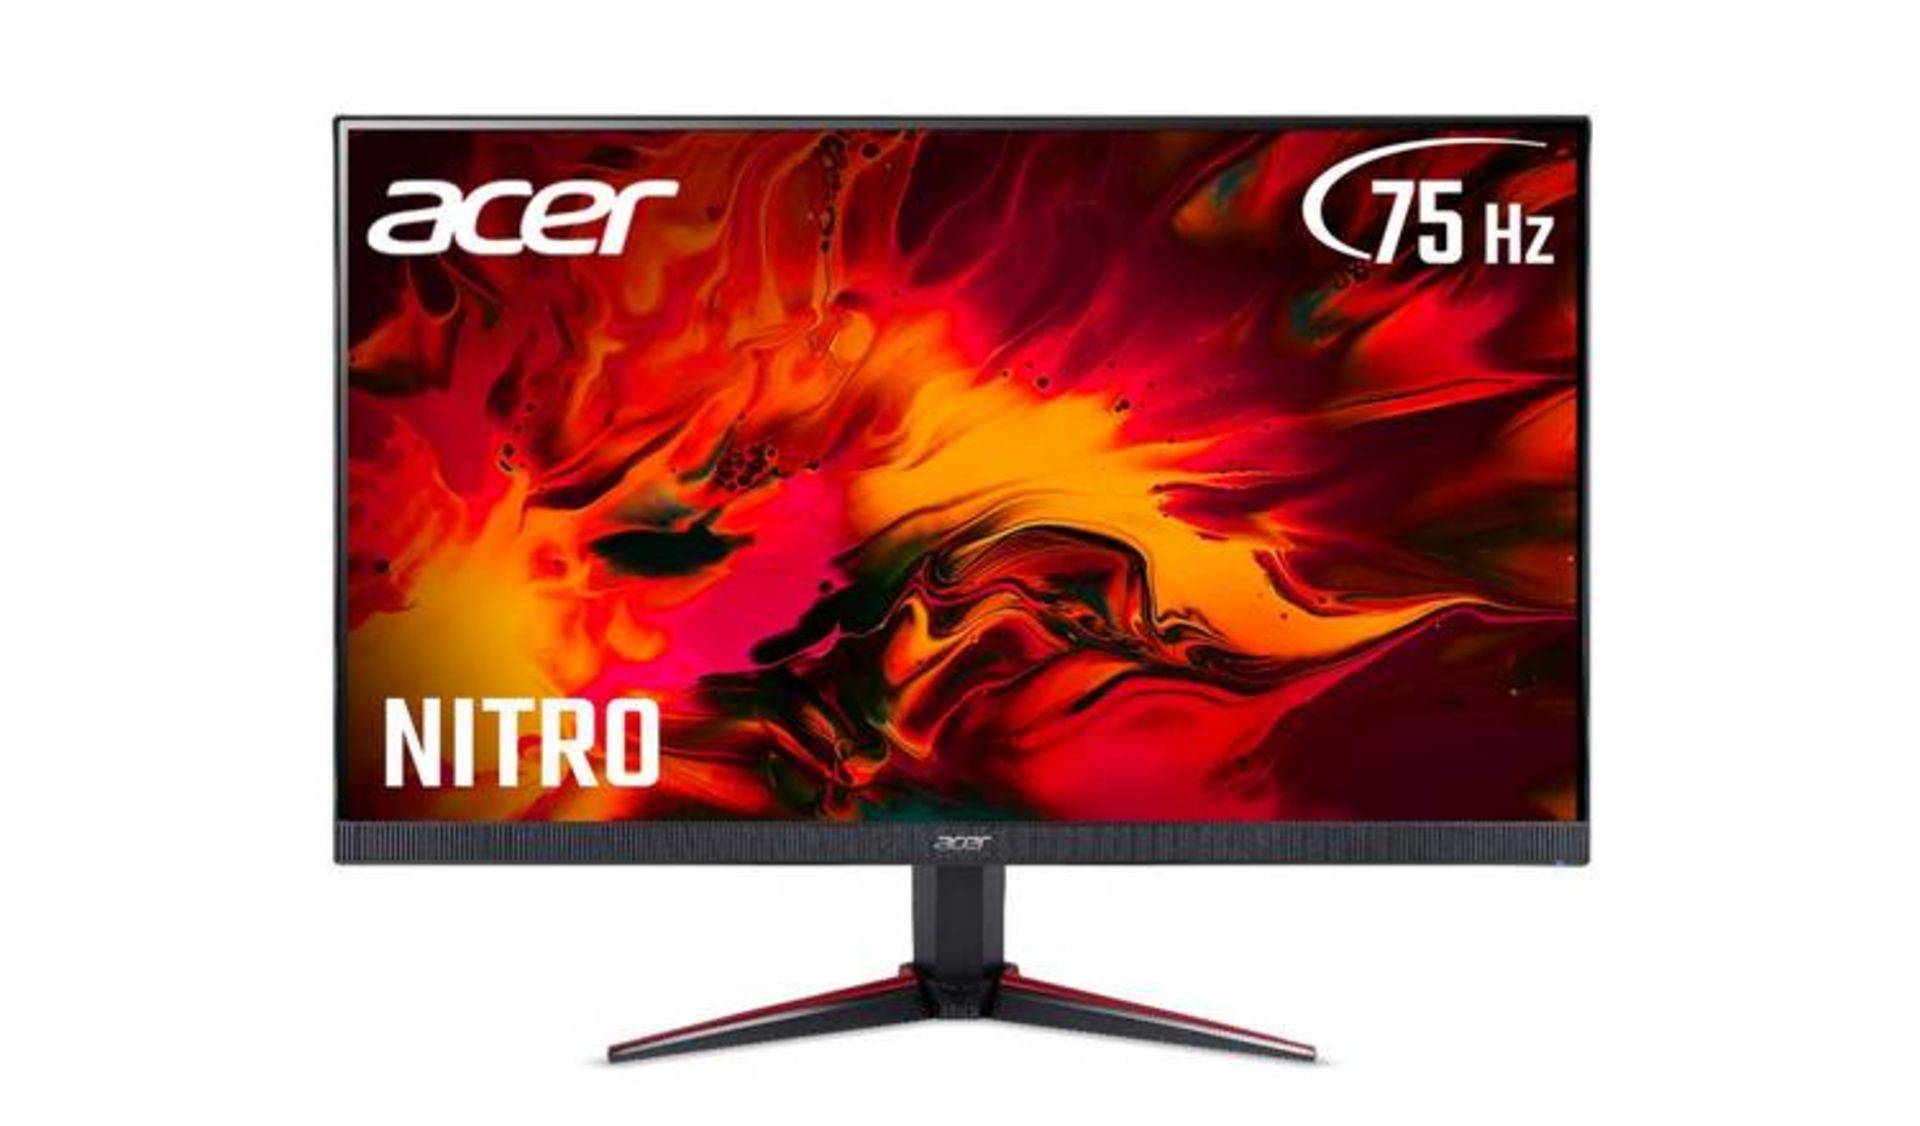 1 ACER NITRO VG270BMIIX 27" FHD 75HZ IPS GAMING MONITOR RRP Â£199 (WORKING)